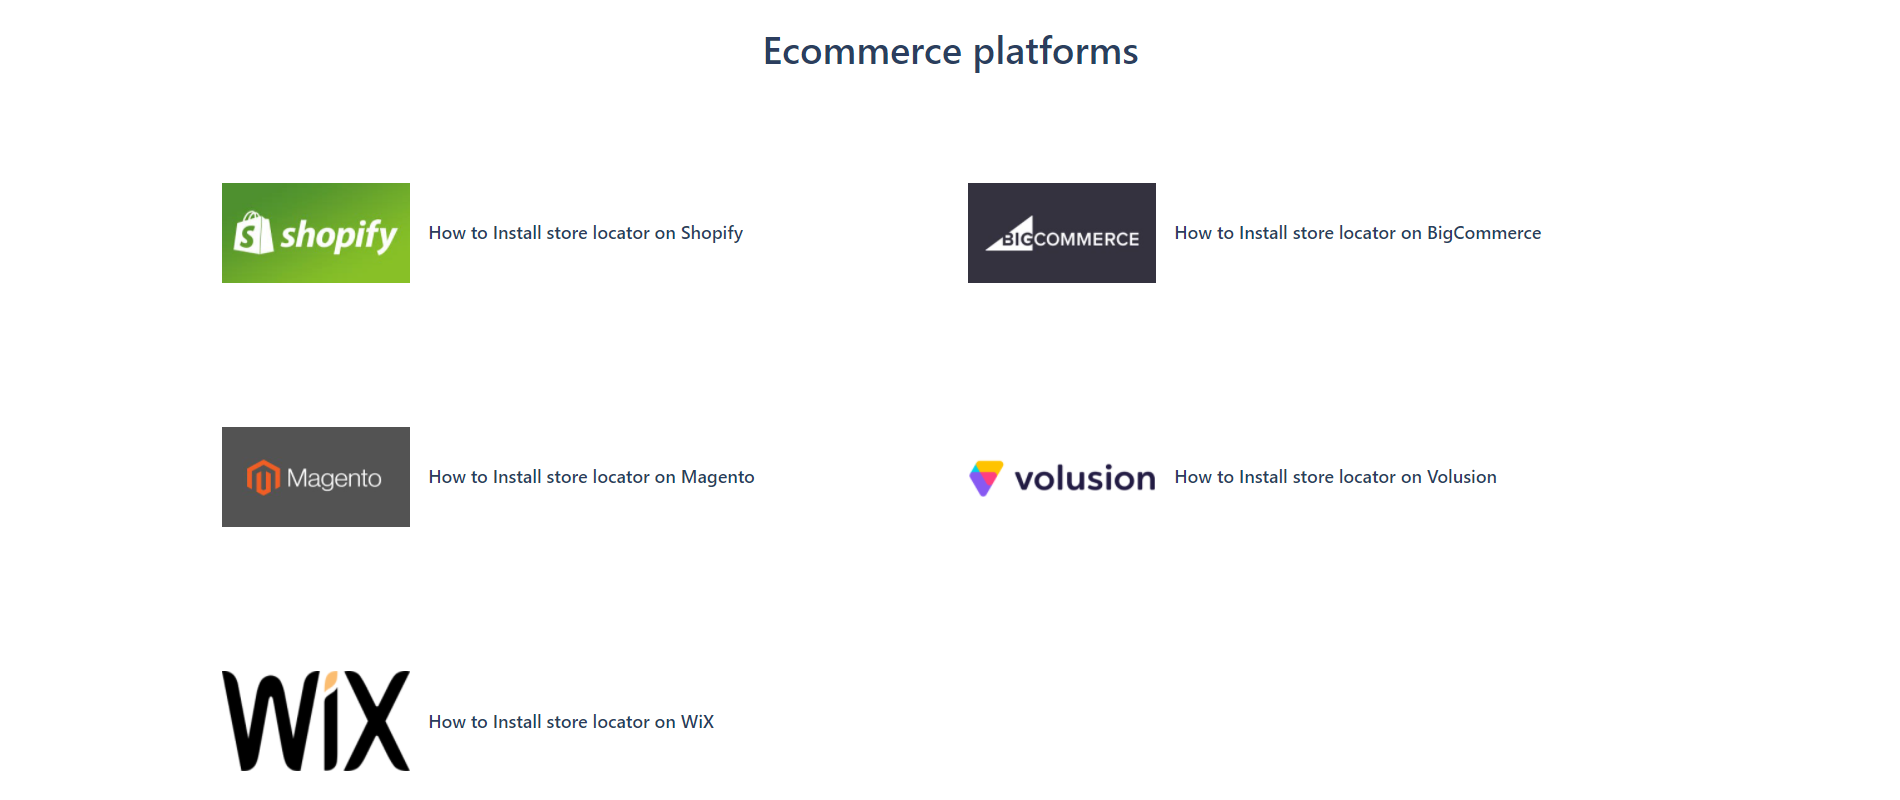 AIO- Supported Ecommerce Platforms. Shopify, BigCommerce, Wix, Magento, Volusion